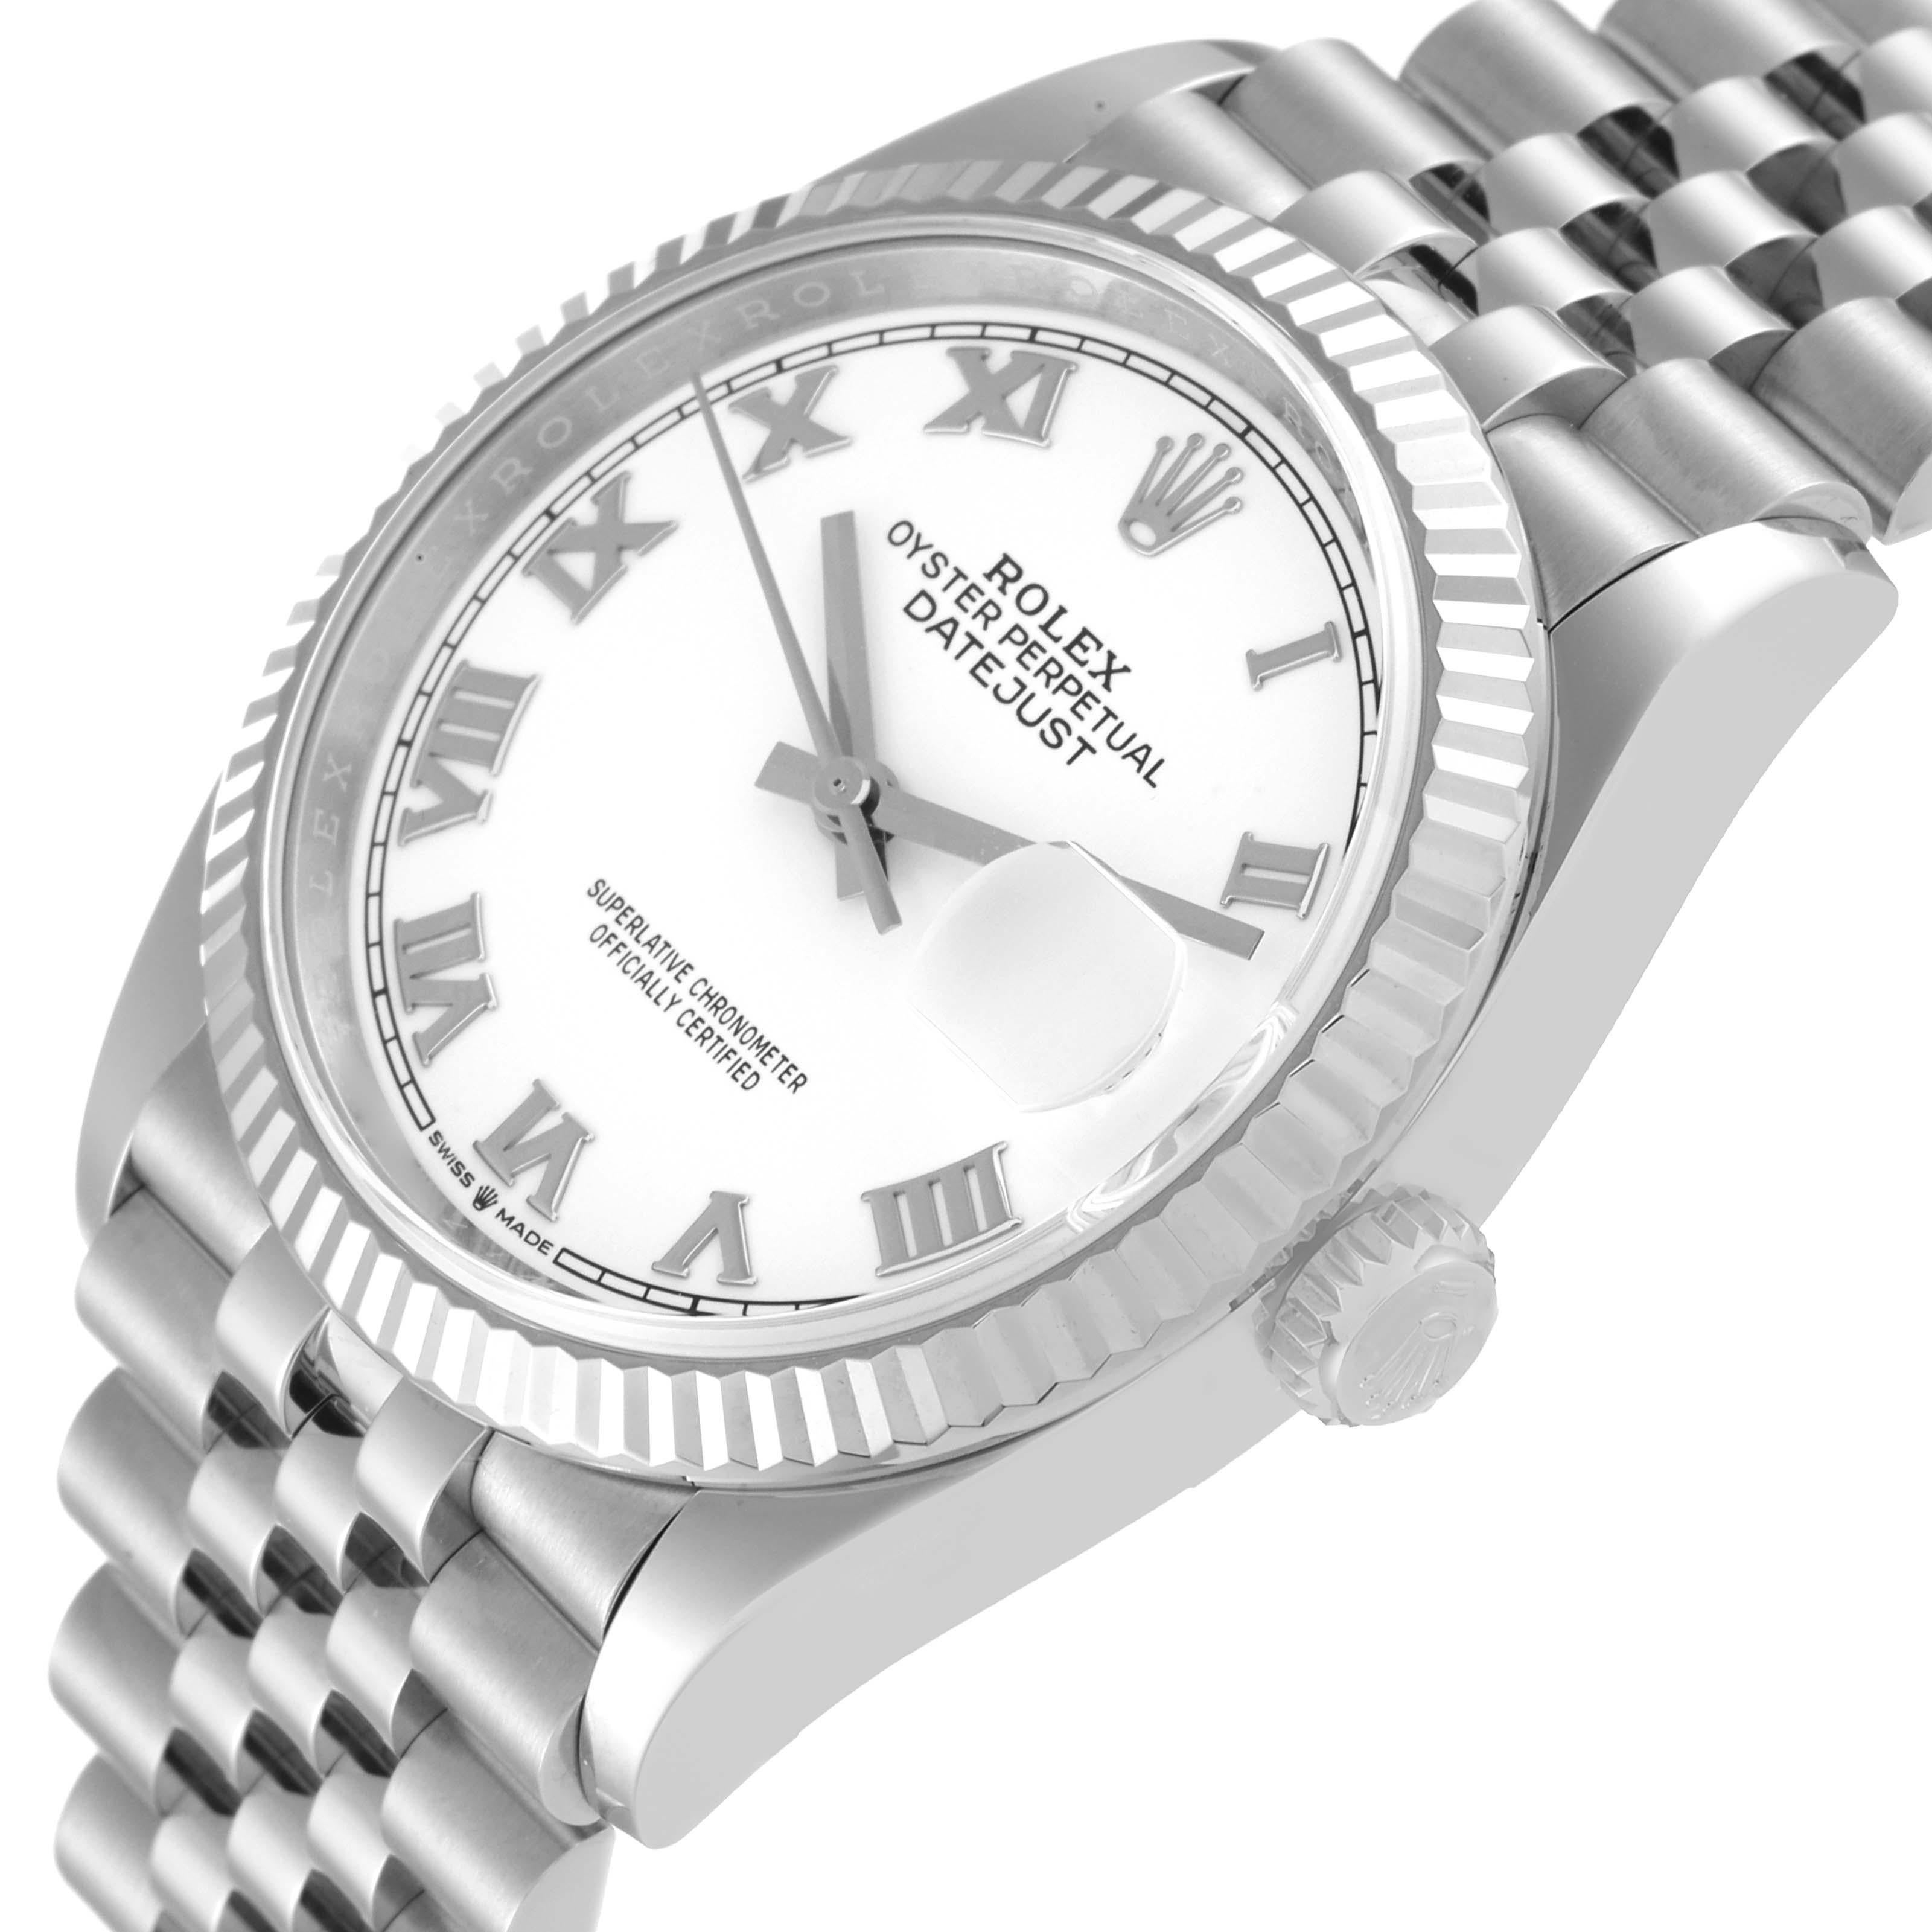 Rolex Datejust Steel White Gold White Dial Mens Watch 126234 Box Card 1